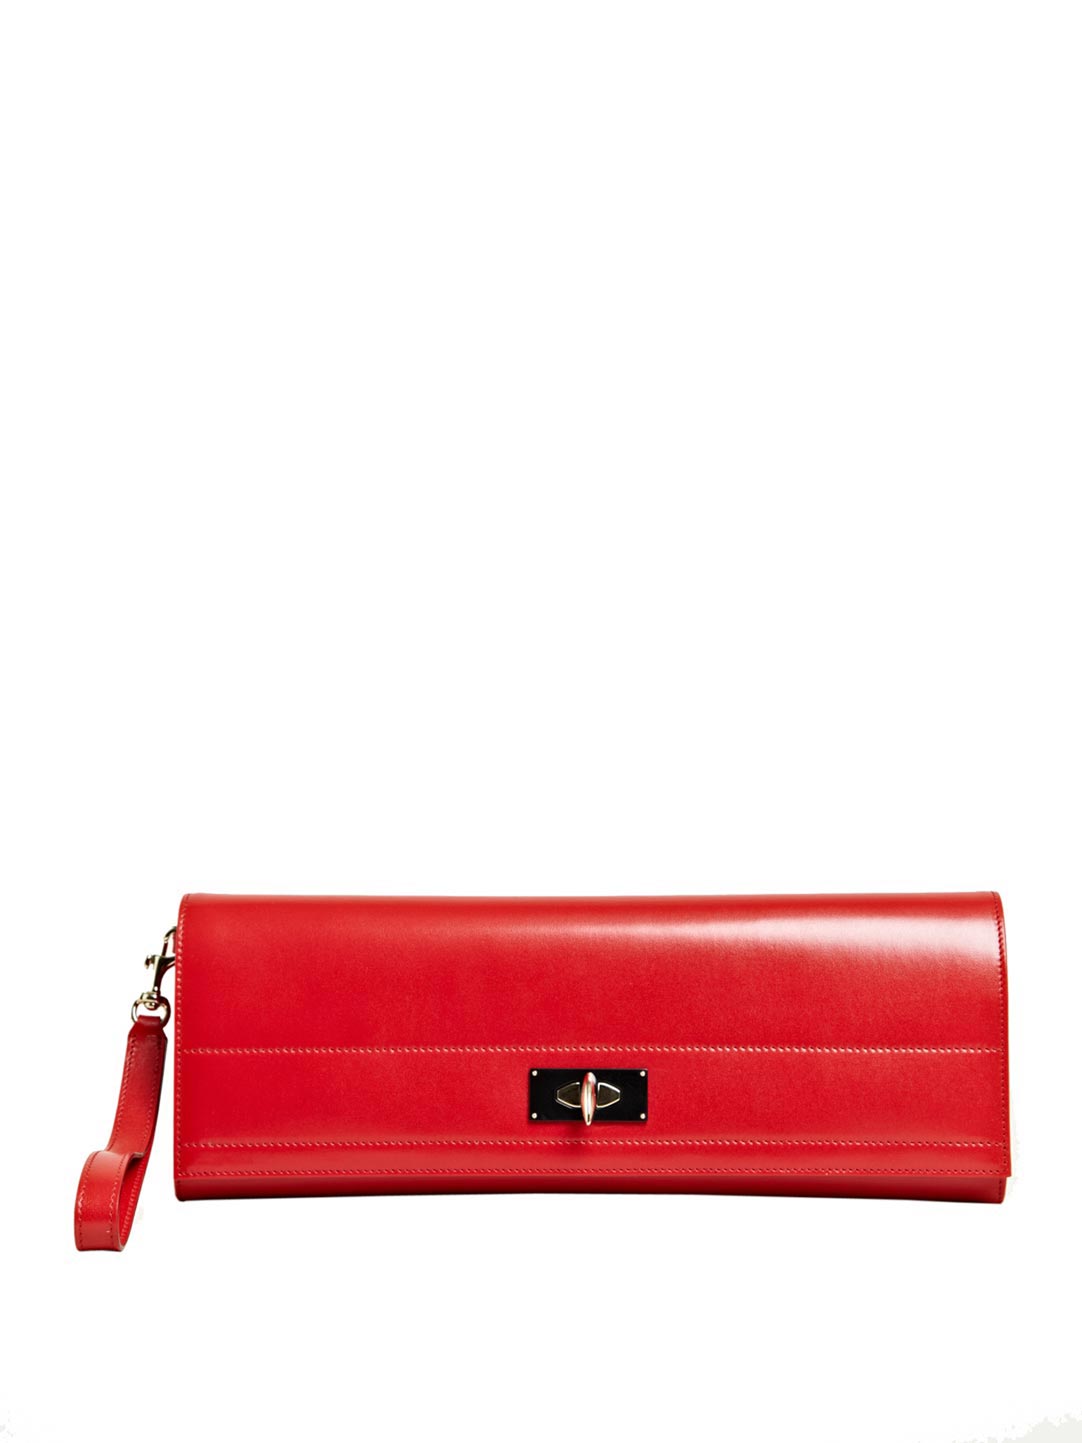 Givenchy Womens Cowhide Long Clutch Bag in Red - Lyst